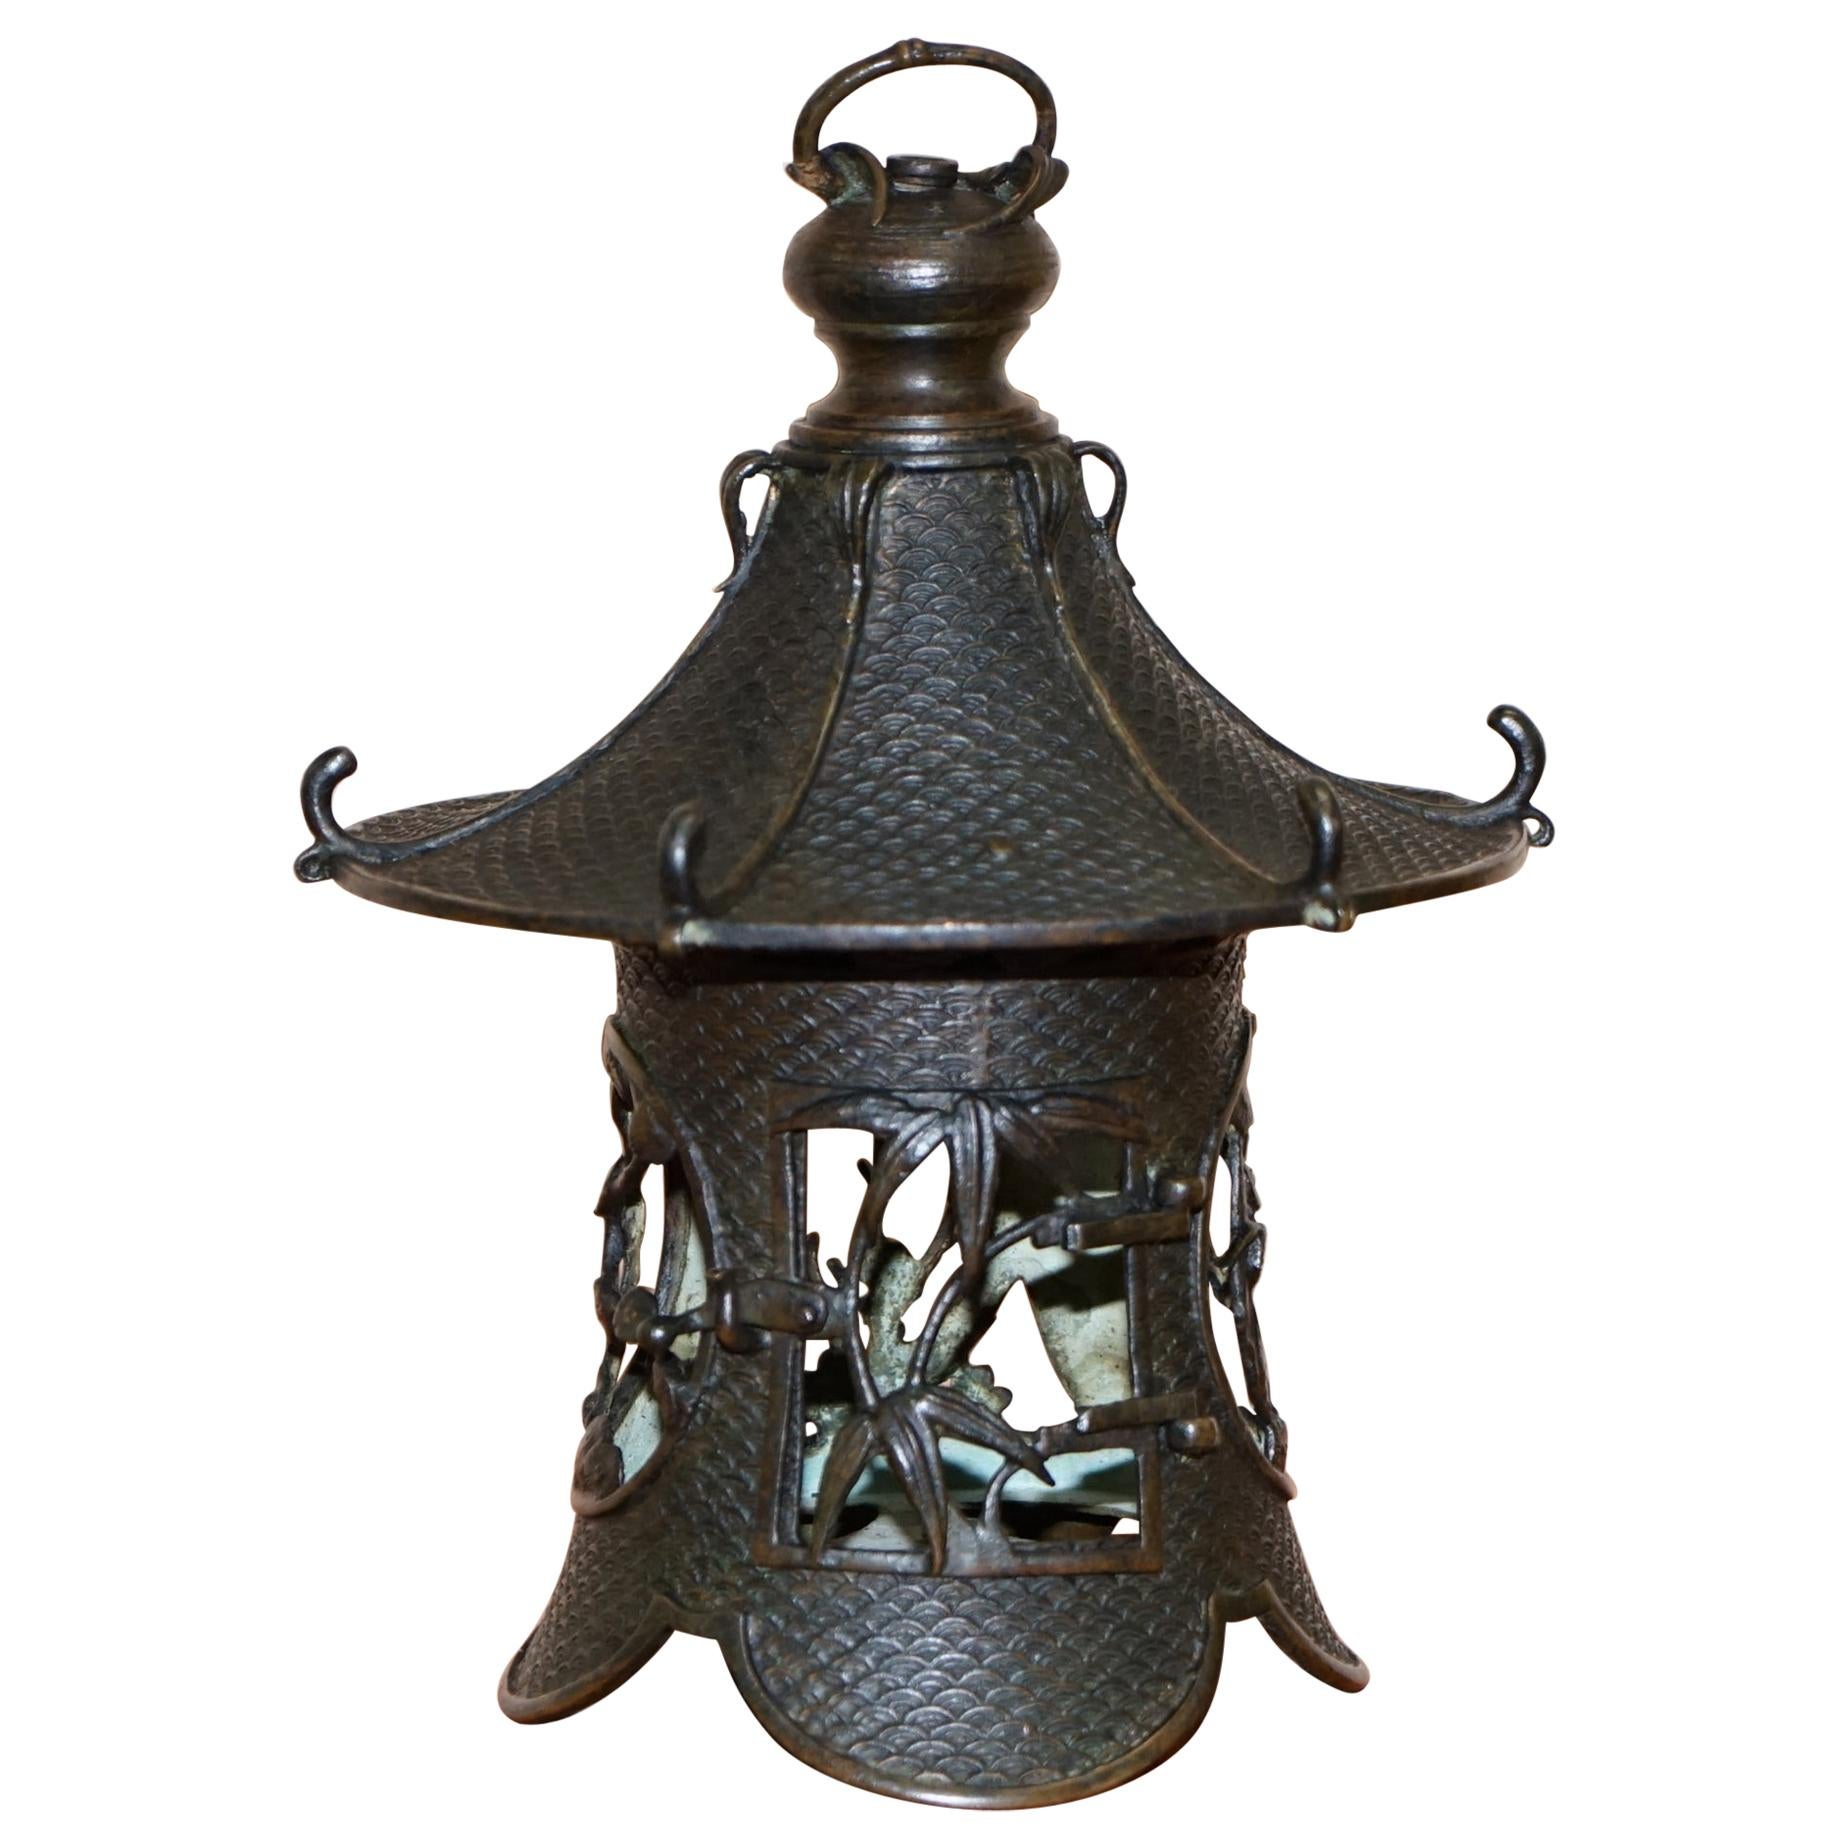 Rare Japanese Bronze circa 1930 Hanging Lantern Decorated with Floral Scenes